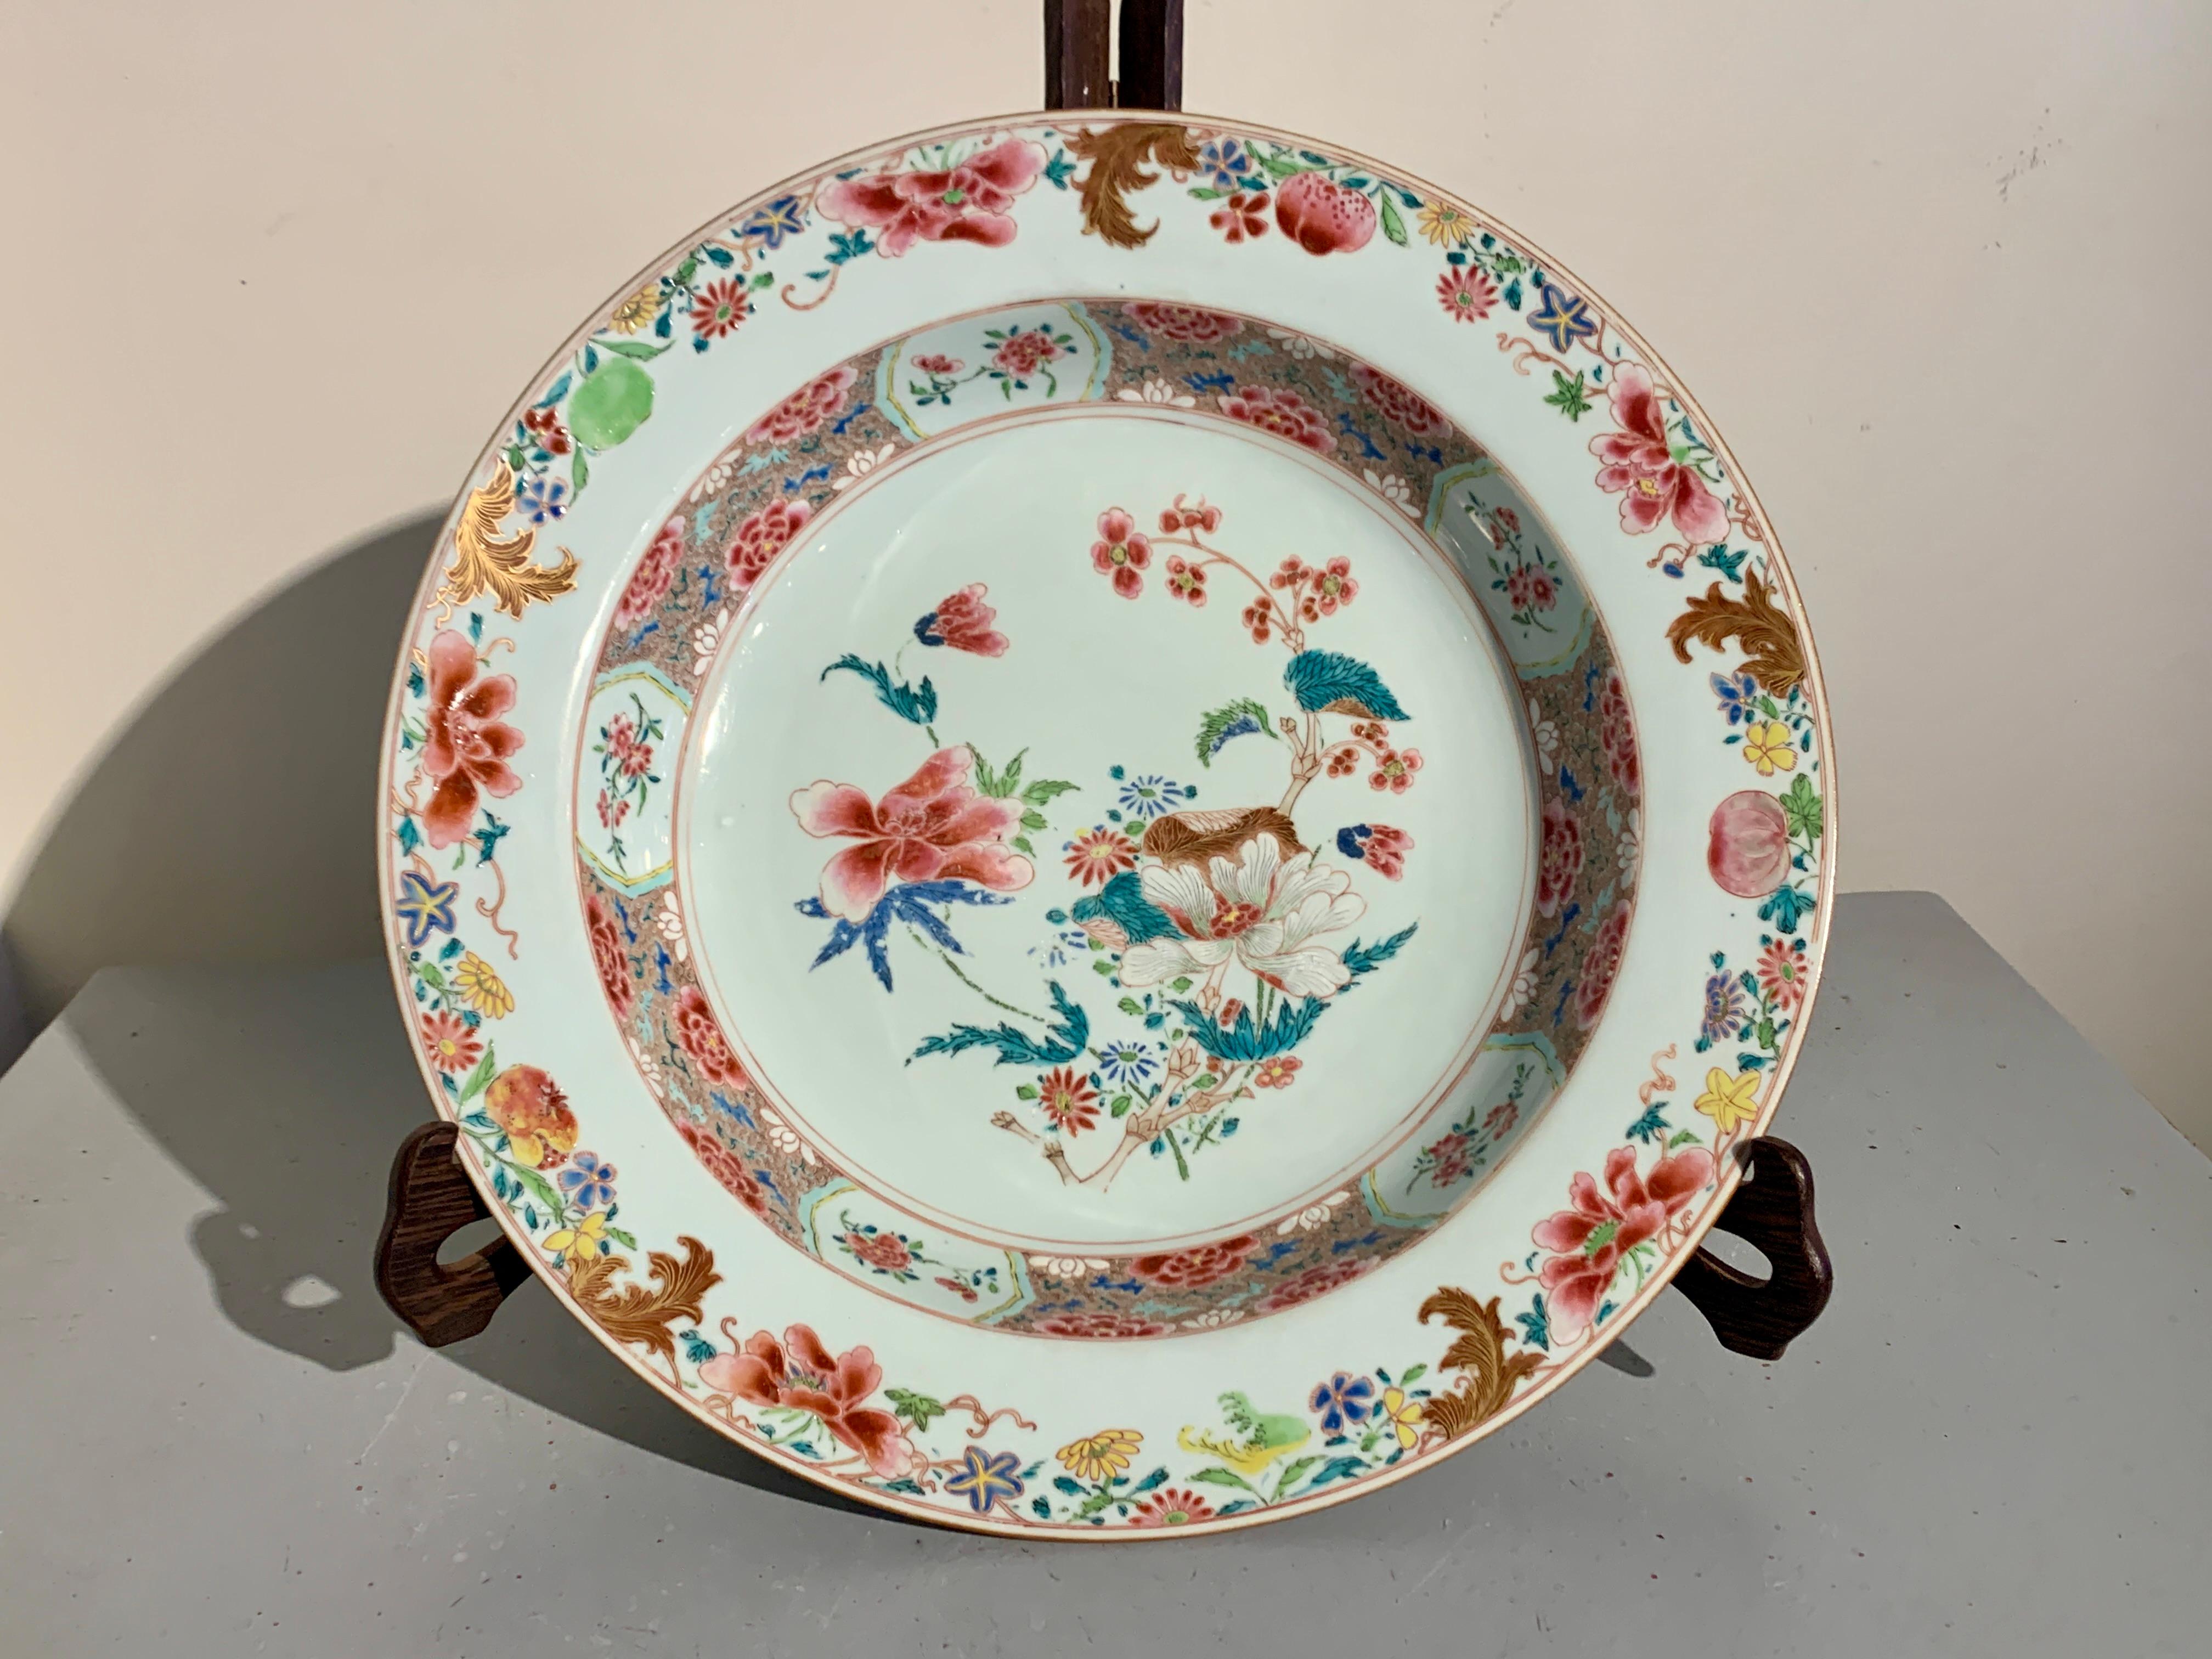 A large and impressive Chinese export famille rose enameled porcelain deep dish or shallow basin, first half of the 18th century, Qing Dynasty, Yongzheng or Qianlong Period, China.

The dish of large and gracious proportions, featuring a deep well